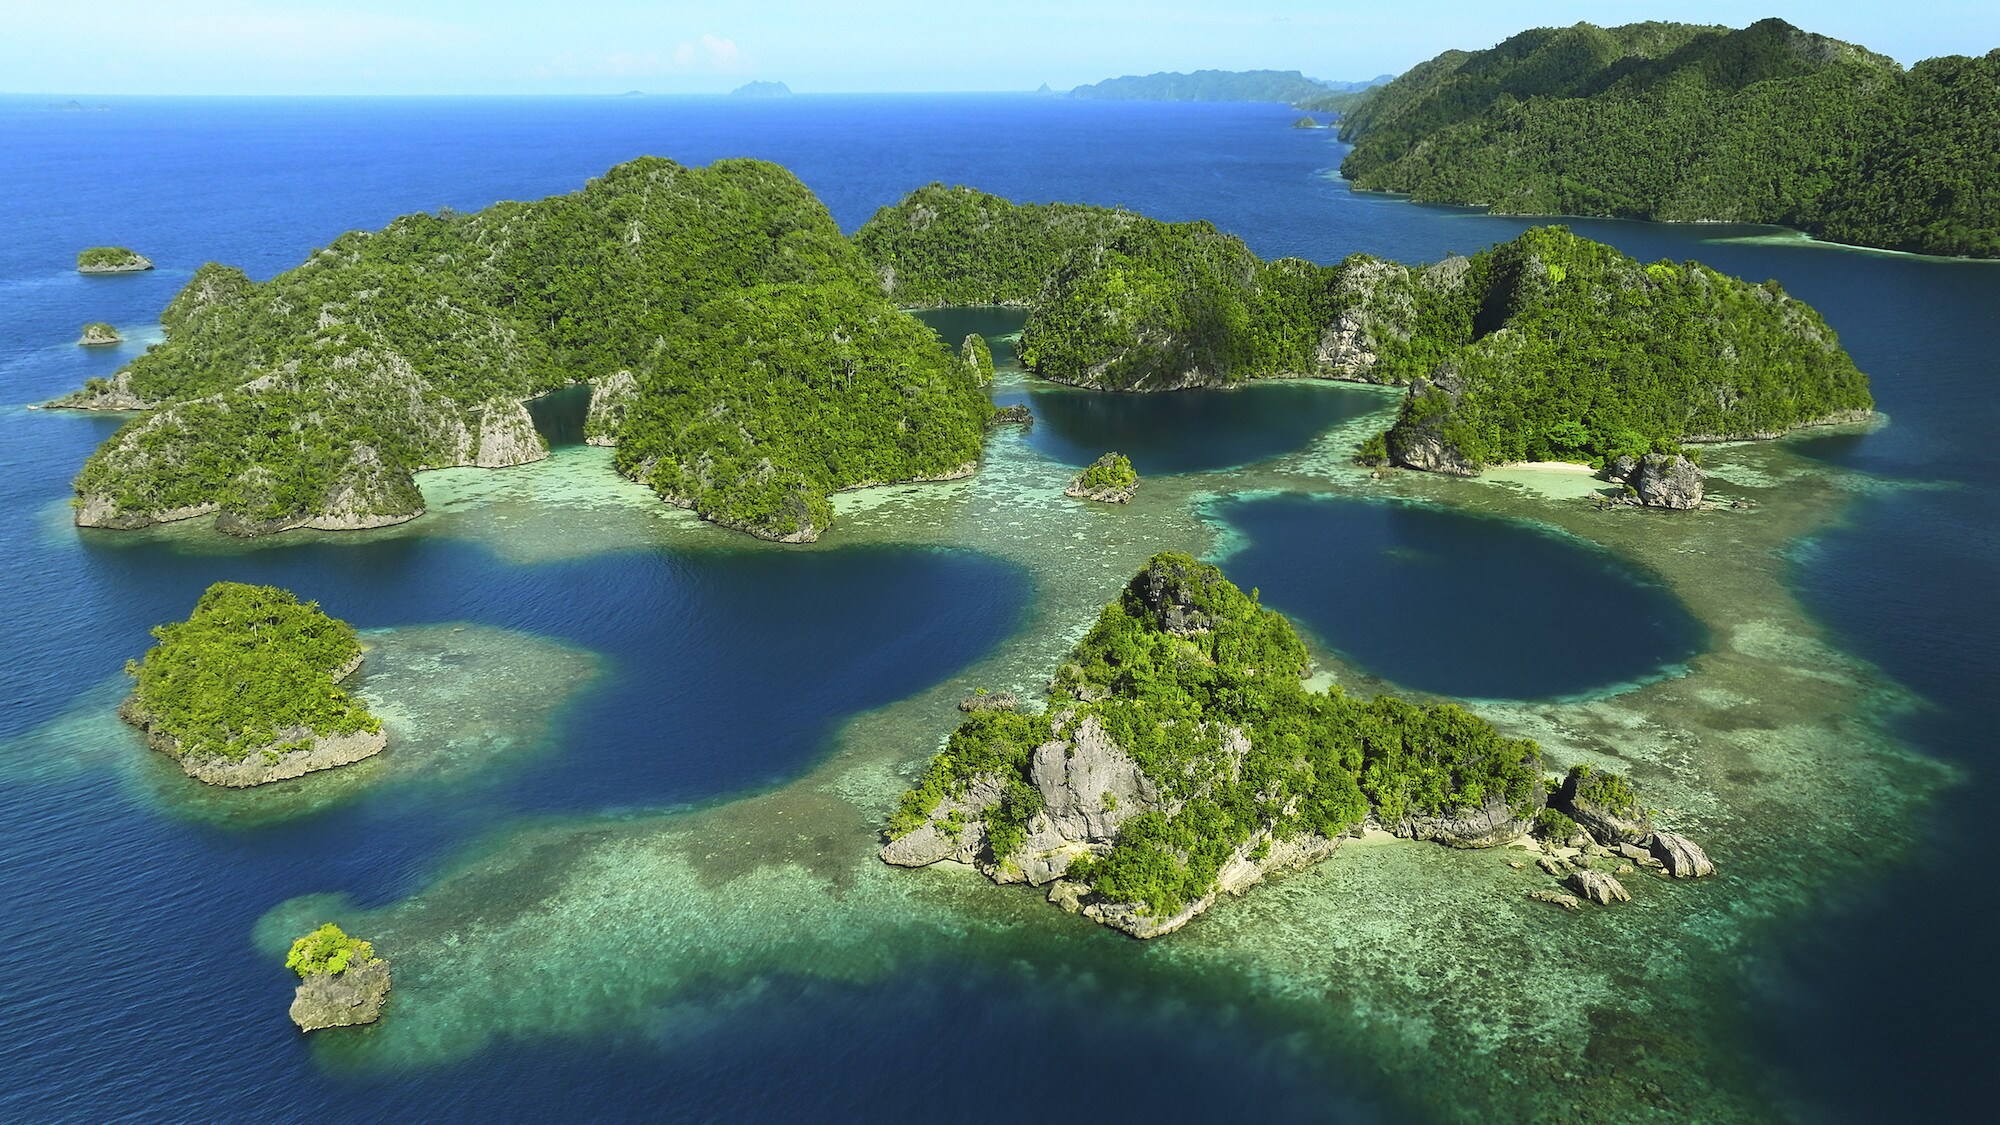 Drone shot of archipelago. (National Geographic for Disney+/Bertie Gregory)